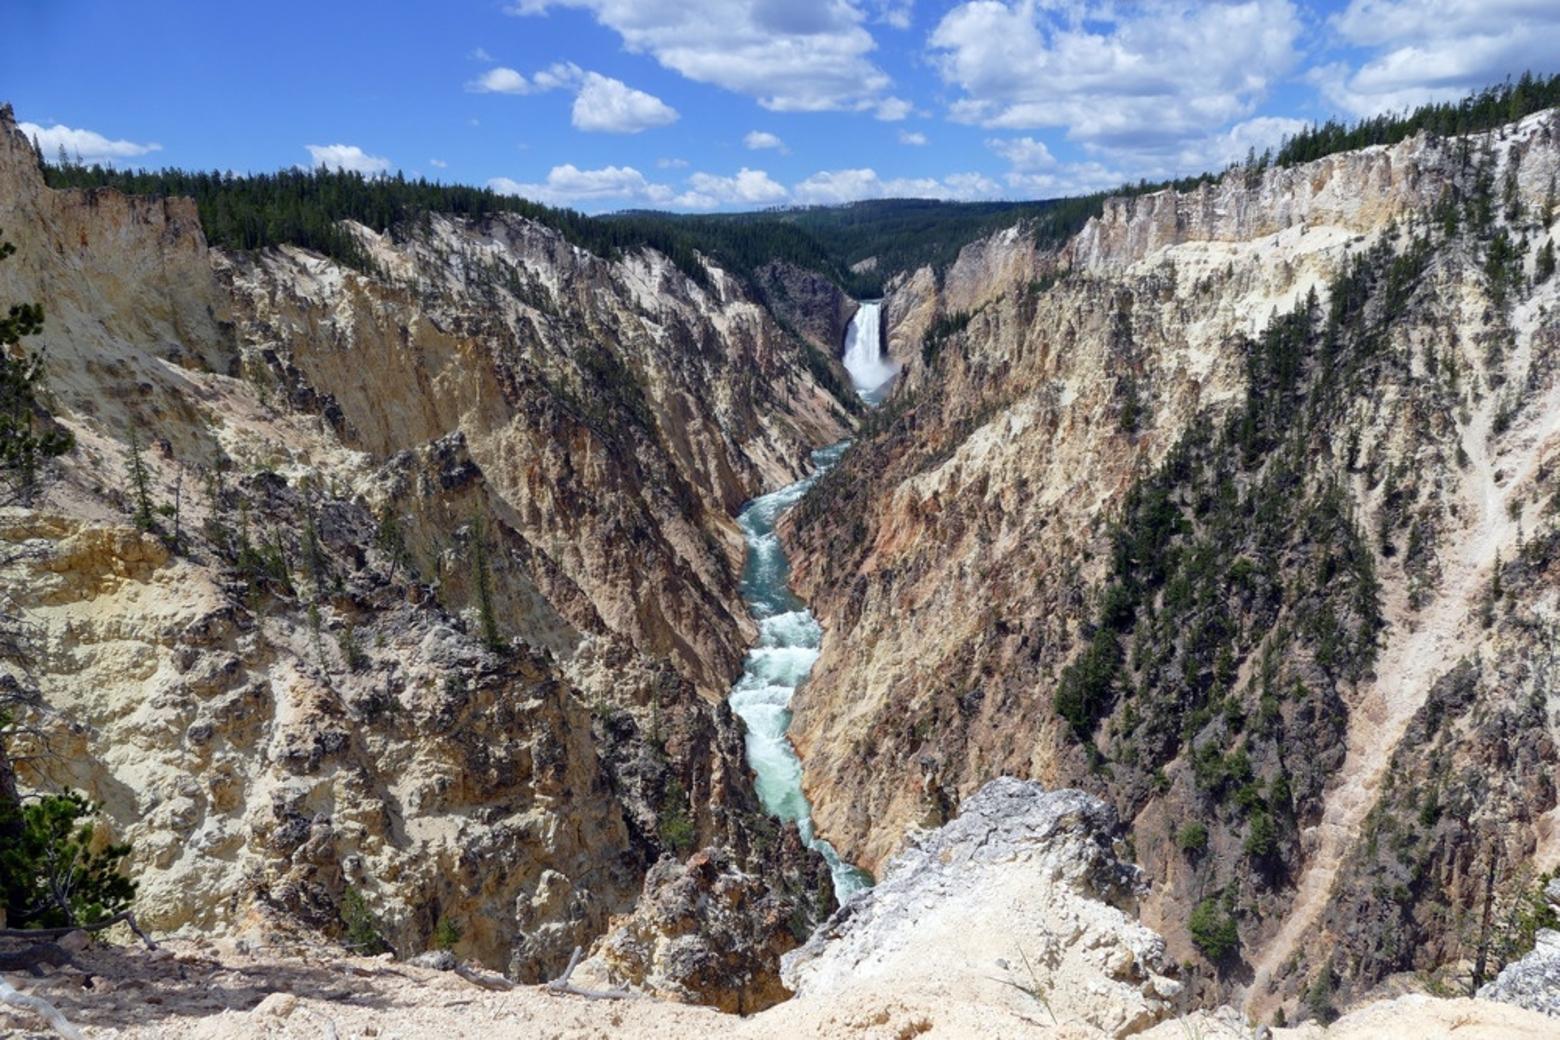 The Lower Falls of the Yellowstone River. In the early 1980s the park saw around 2.5 million visitors per year. Visitation has since nearly doubled. Photo by Diane Renkin/NPS